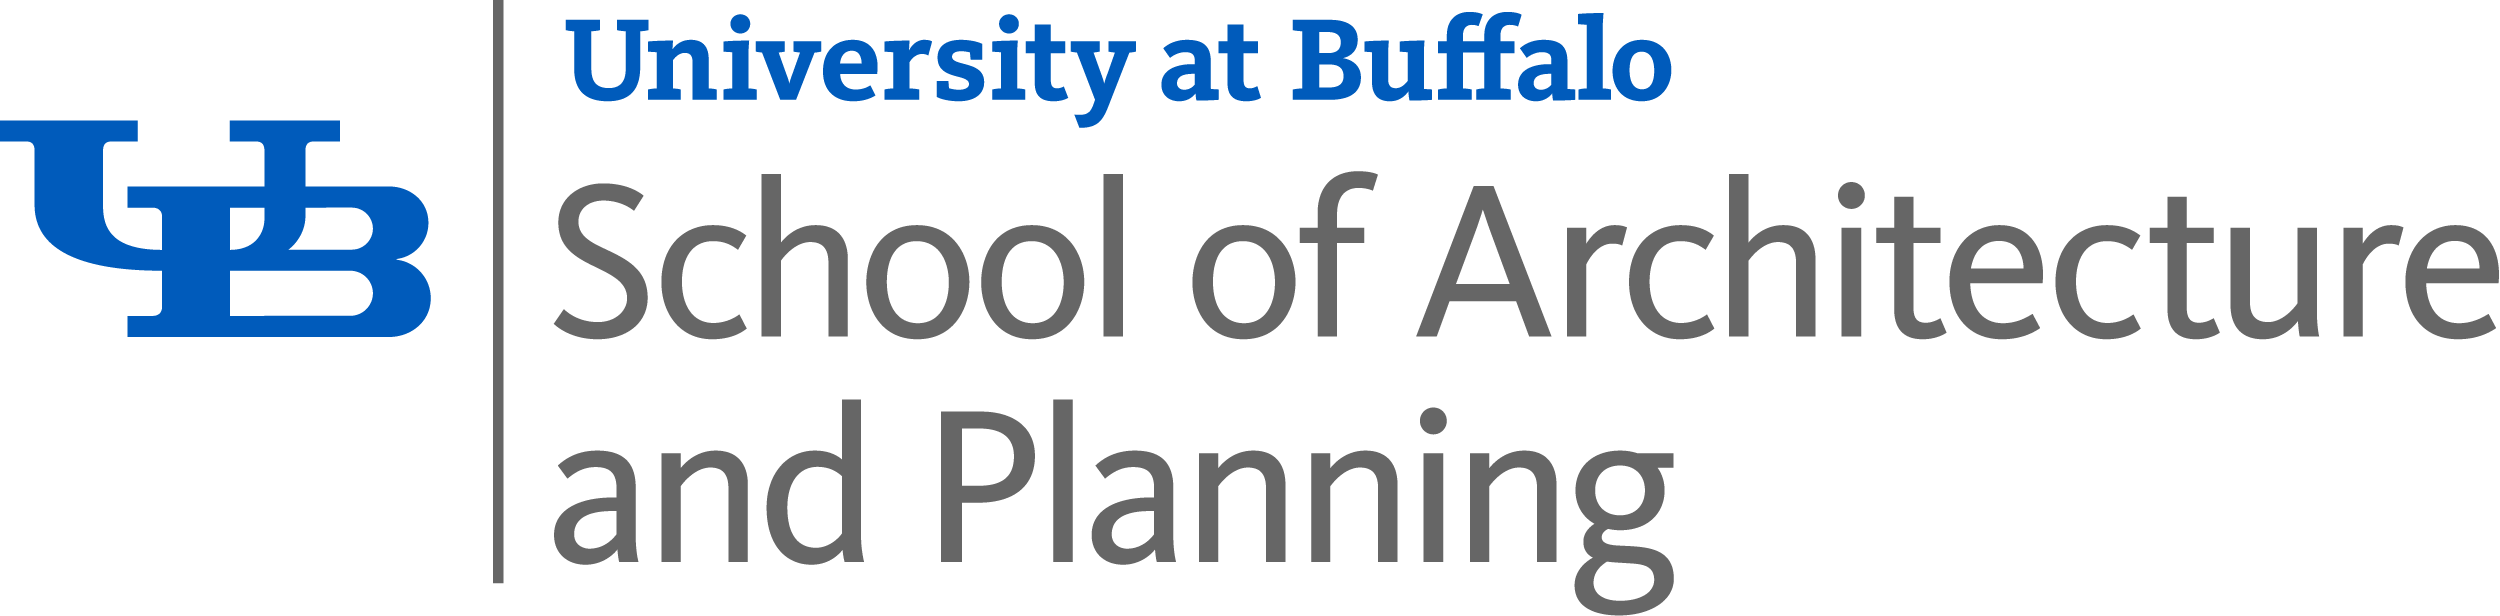 University at Buffalo, State University of New York, School of Architecture and Planning